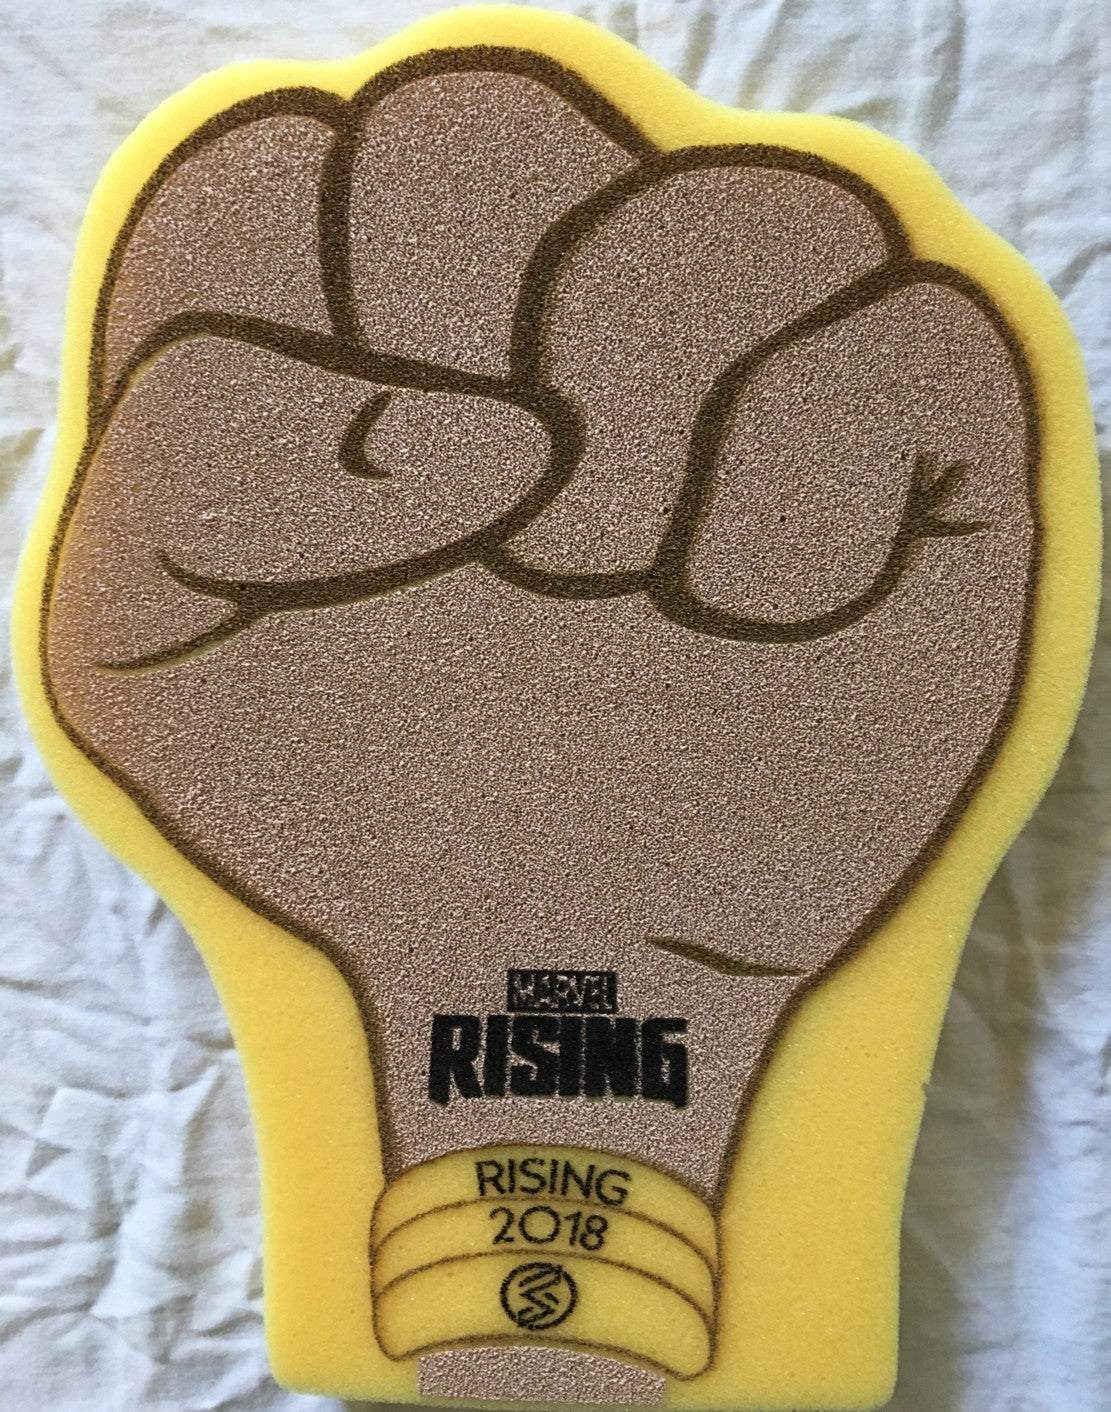 Marvel Rising and Ms. Marvel 2018 San Diego Comic-Con promo yellow foam fist